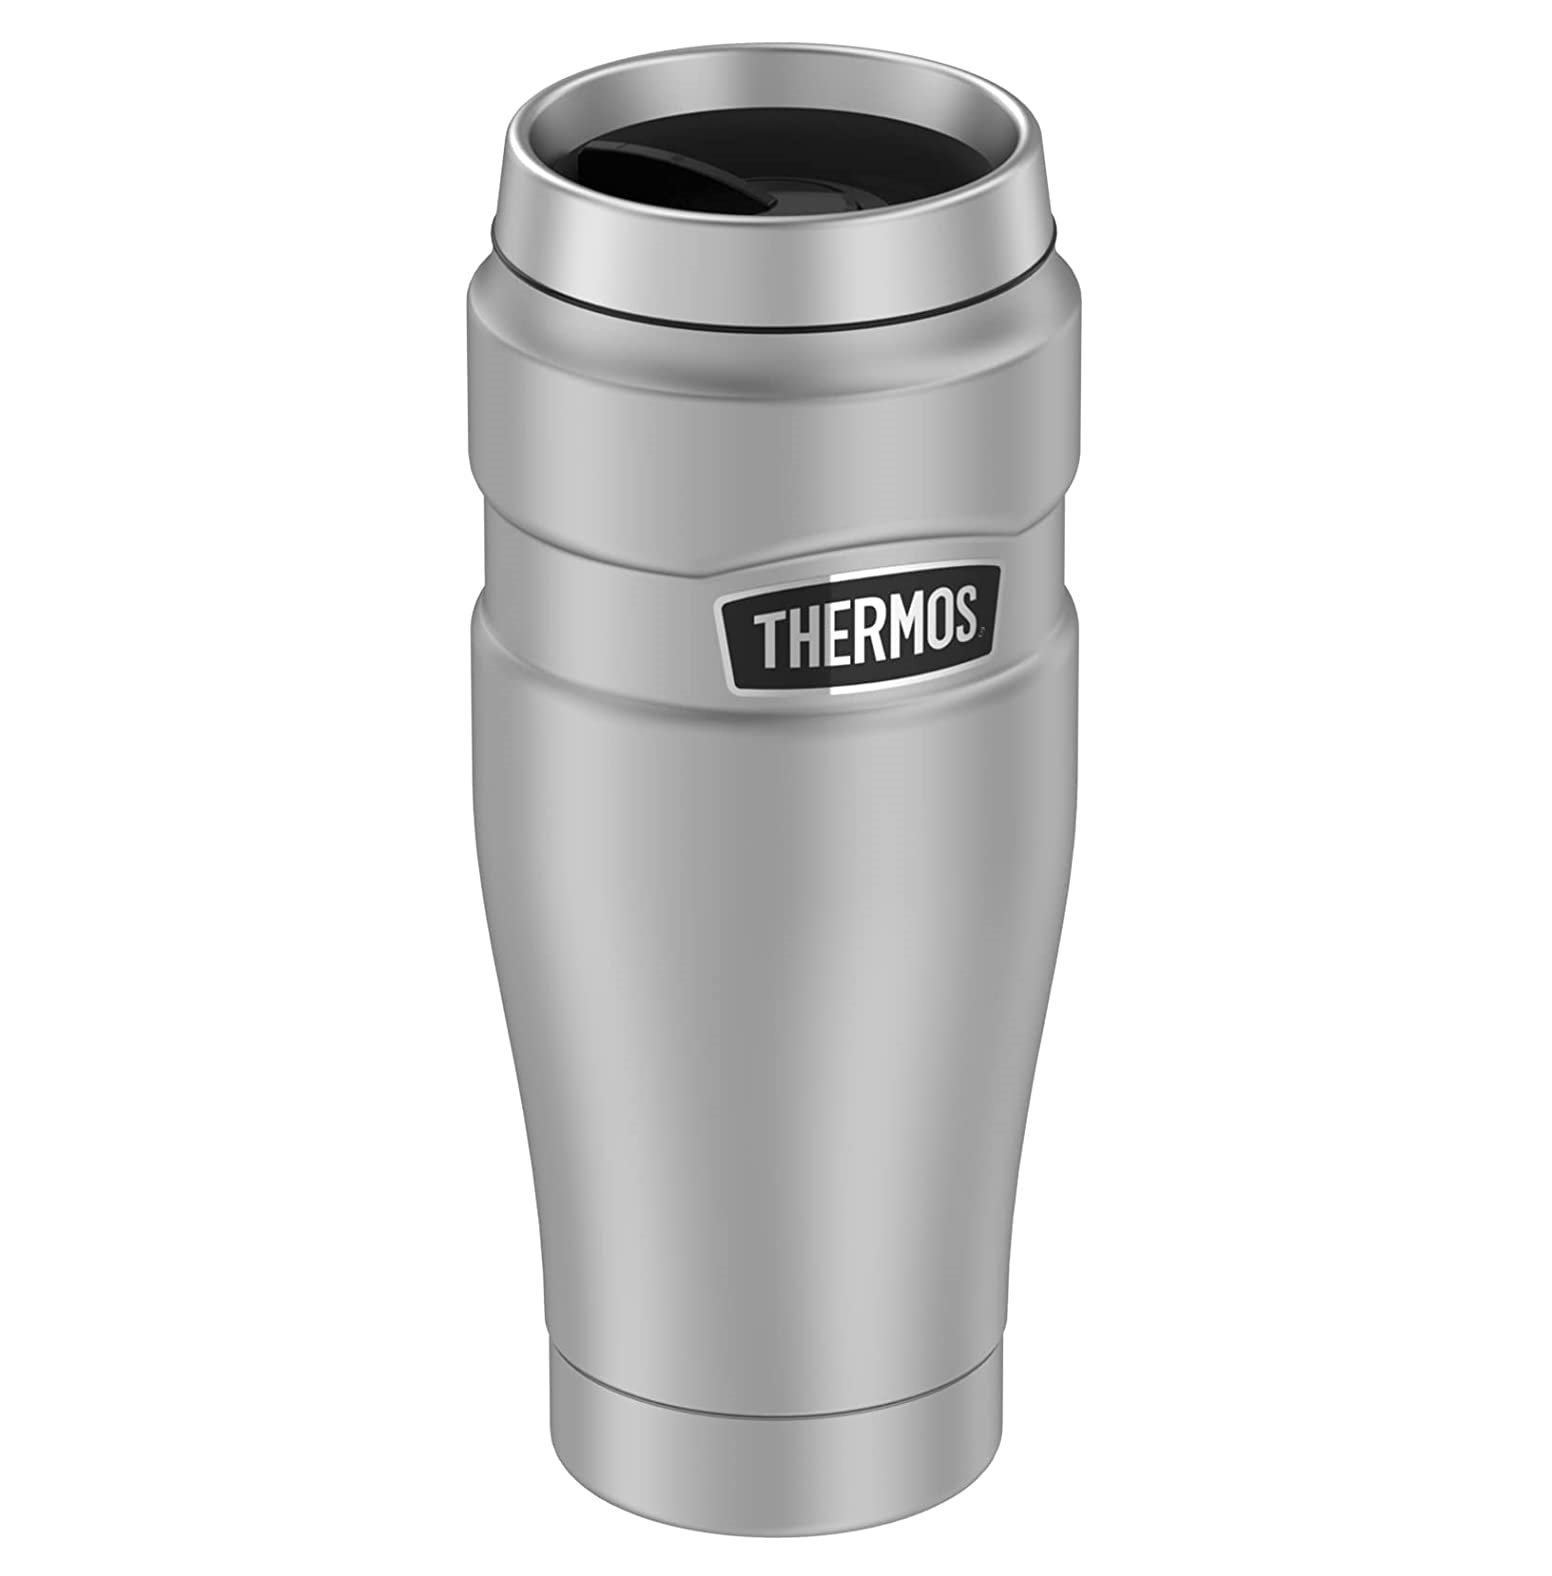 Thermobecher-Test - Alfi Thermos Stainless King